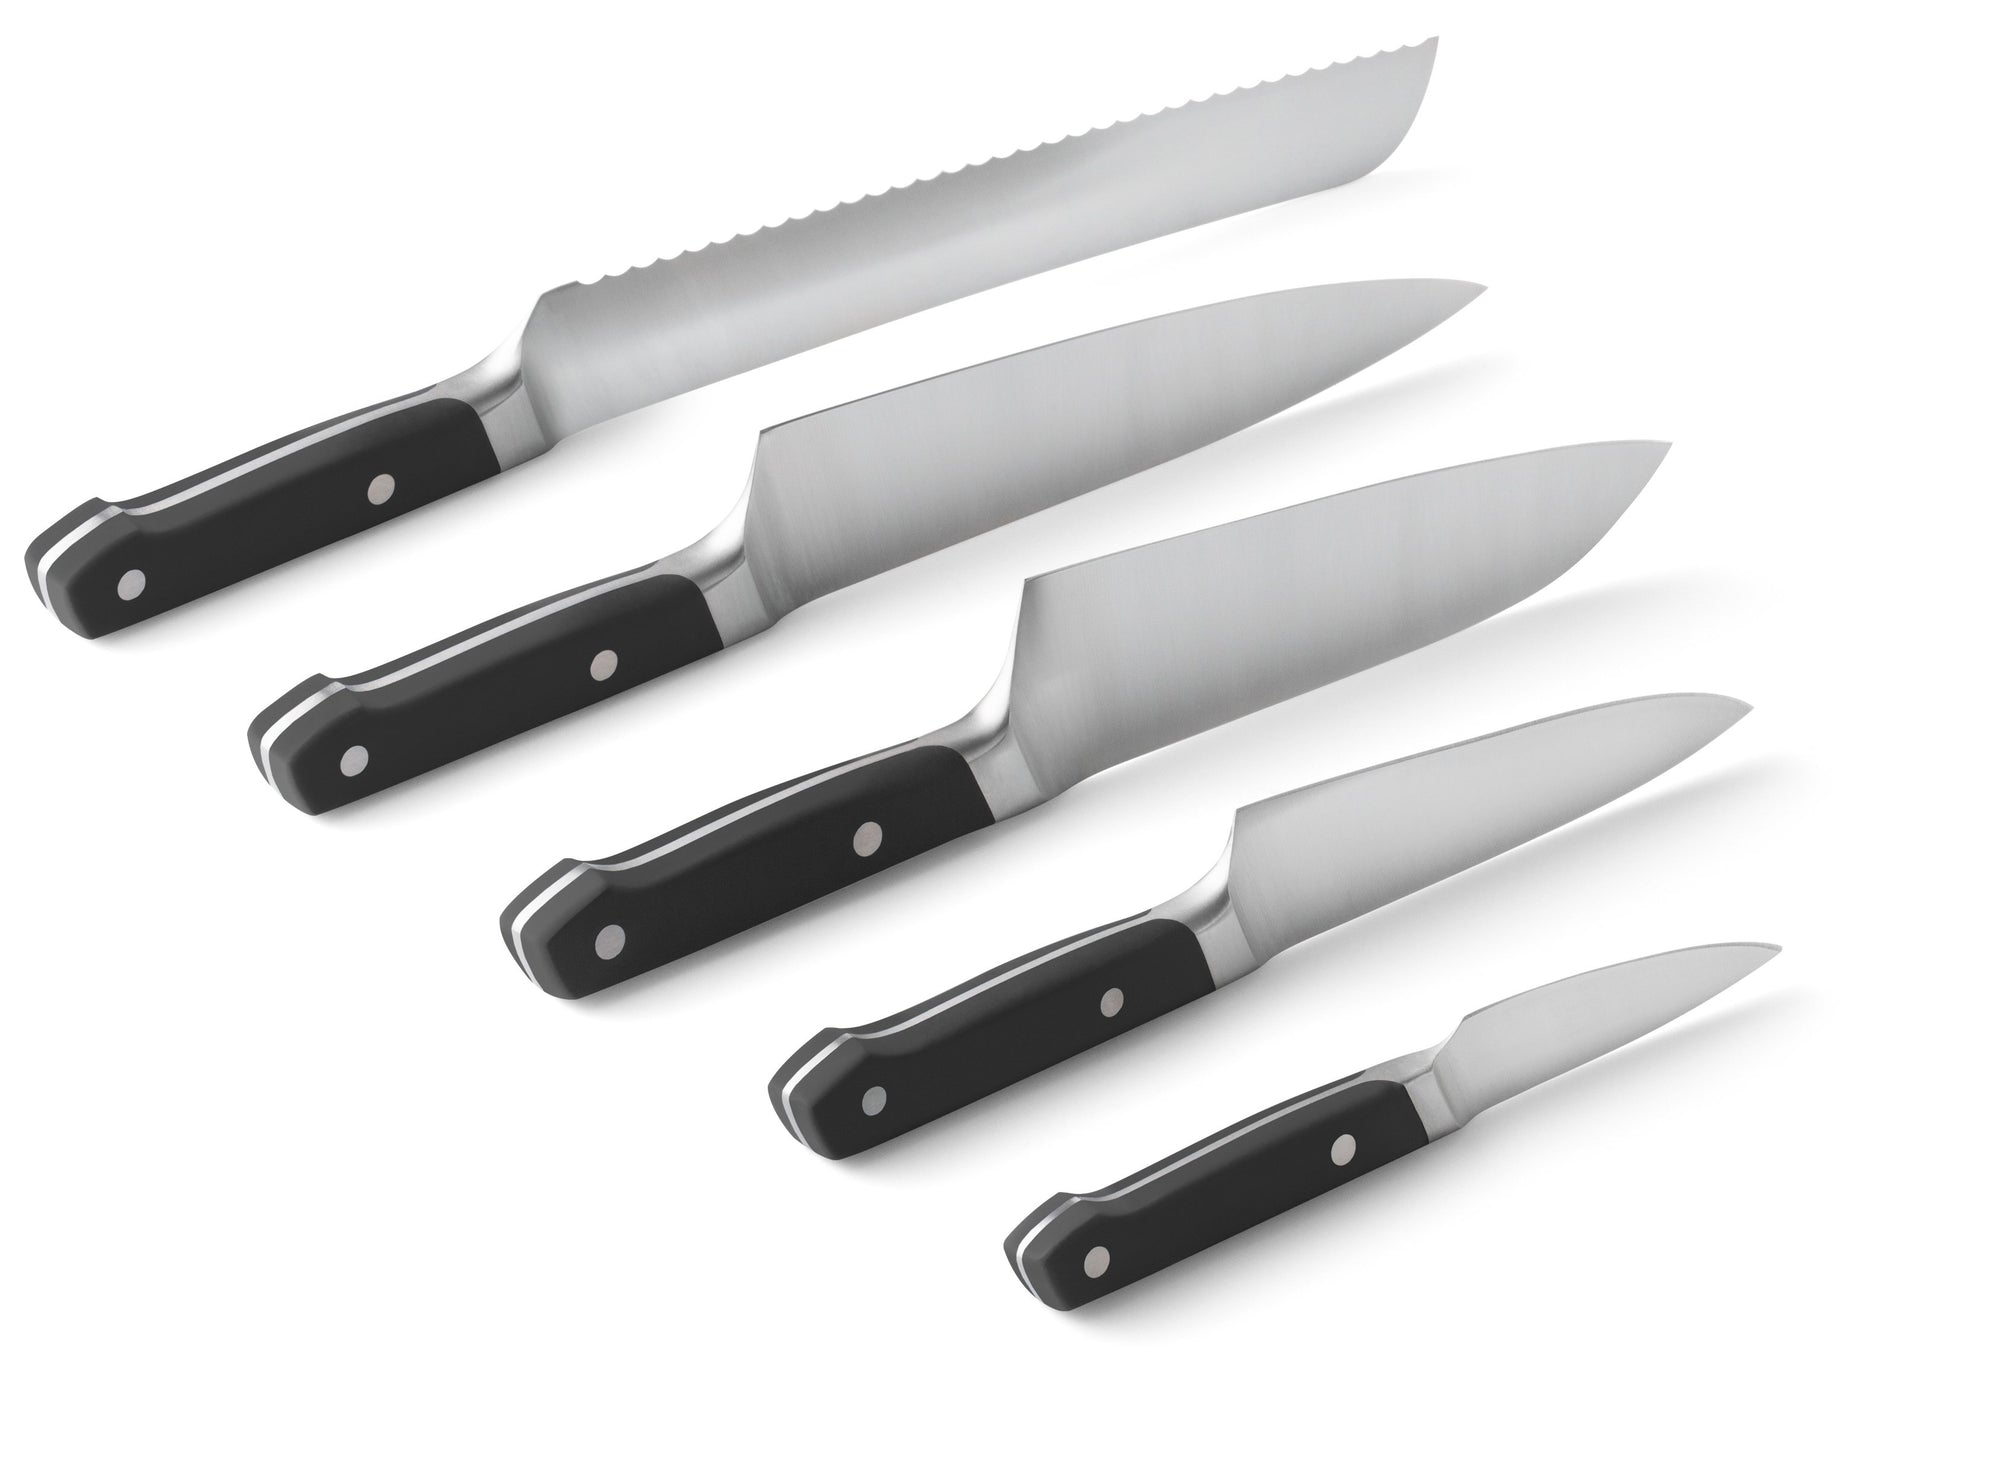 What is a Chef Knife Used For? - Made In